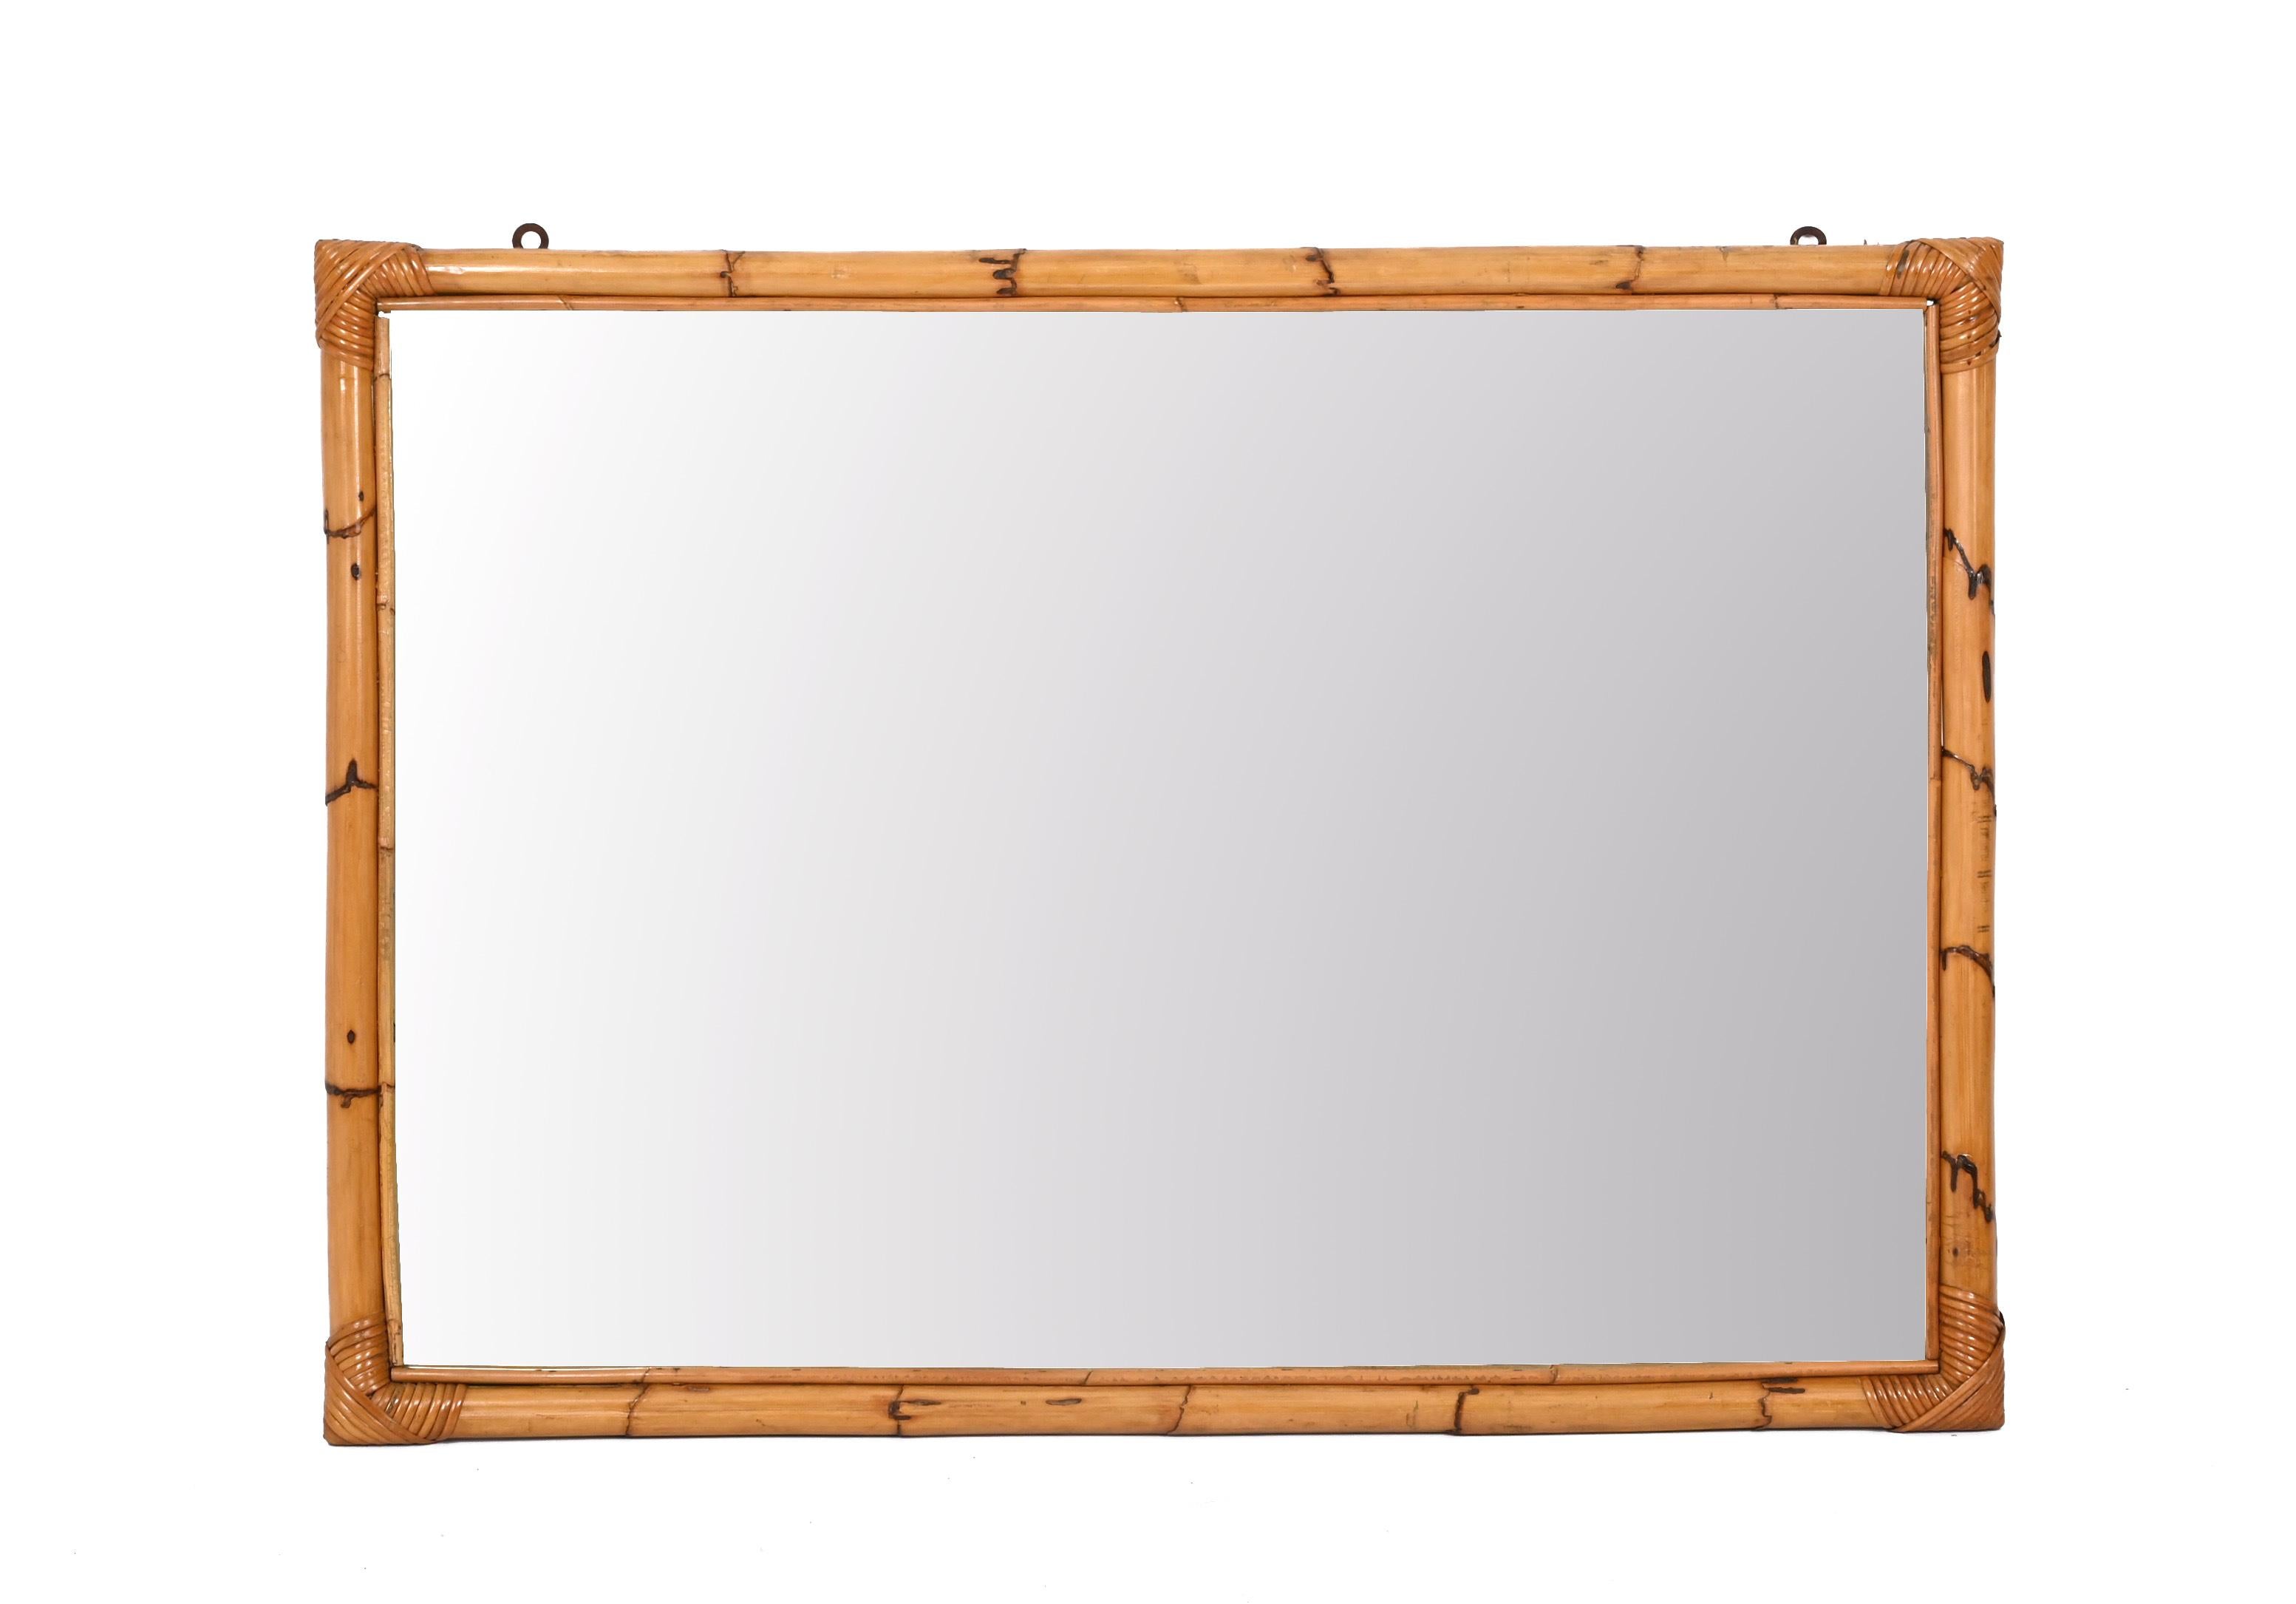 Midcentury Large Rectangular Italian Mirror with Double Bamboo Cane Frame, 1970s For Sale 8